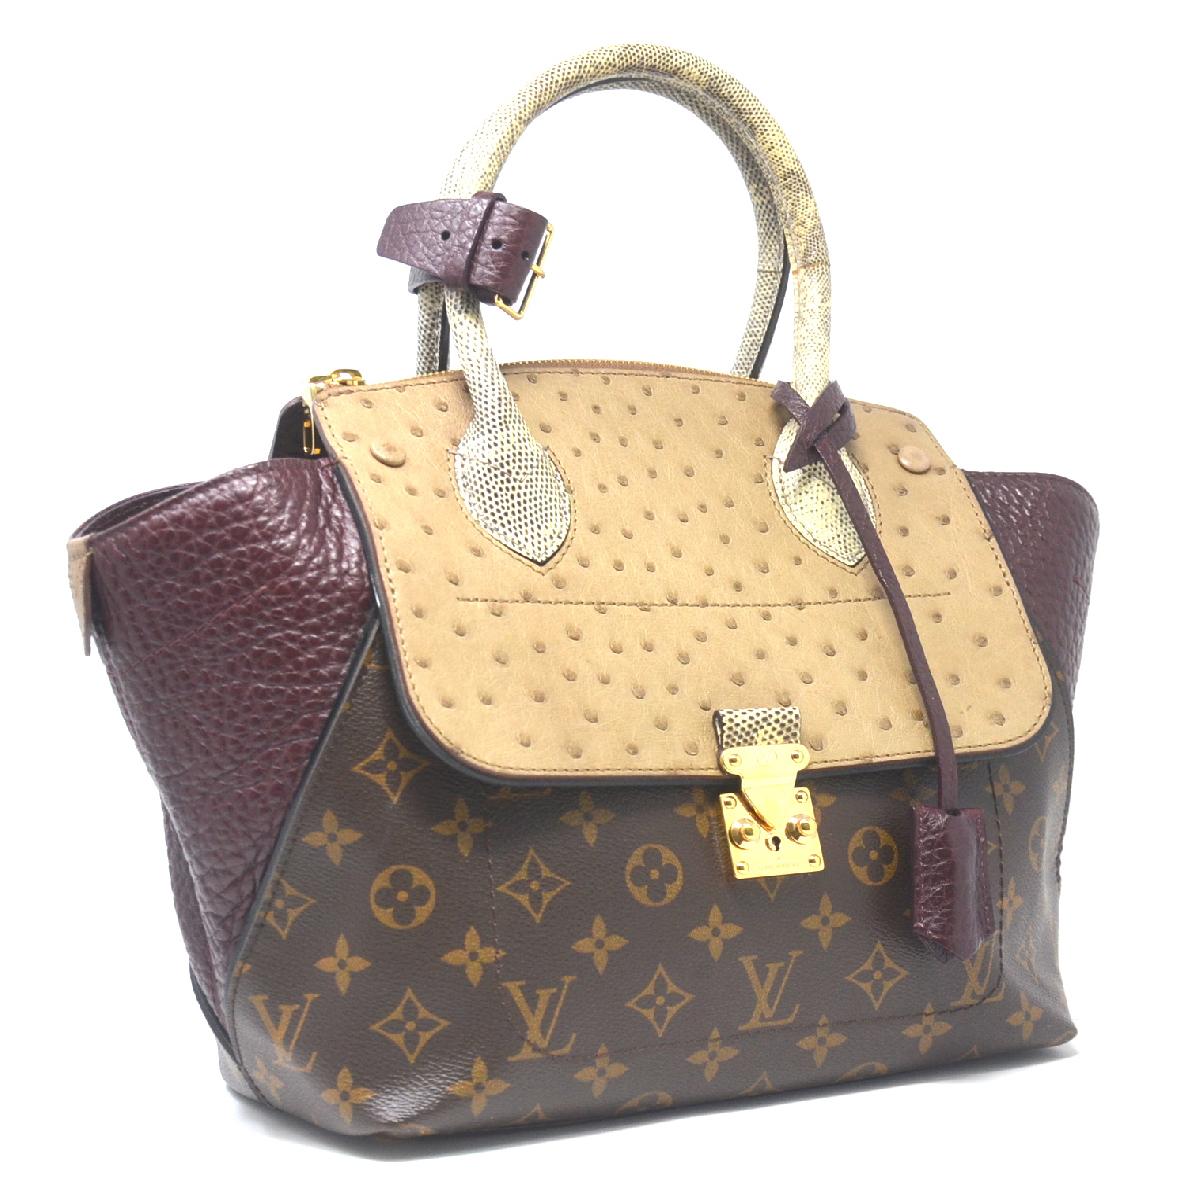 Company-Louis Vuitton
Model-Majestueux PM Dark Red 
Color-Brown
Date Code-AR1153
Material-Monogram Canvas
Measurements-11 x 6 x 11
Strap-N/A
Outside-Lightly used - Ostrich Flap 
Inside-No Stains or Rips - Check Pictrues
Outside Pockets-Lightly